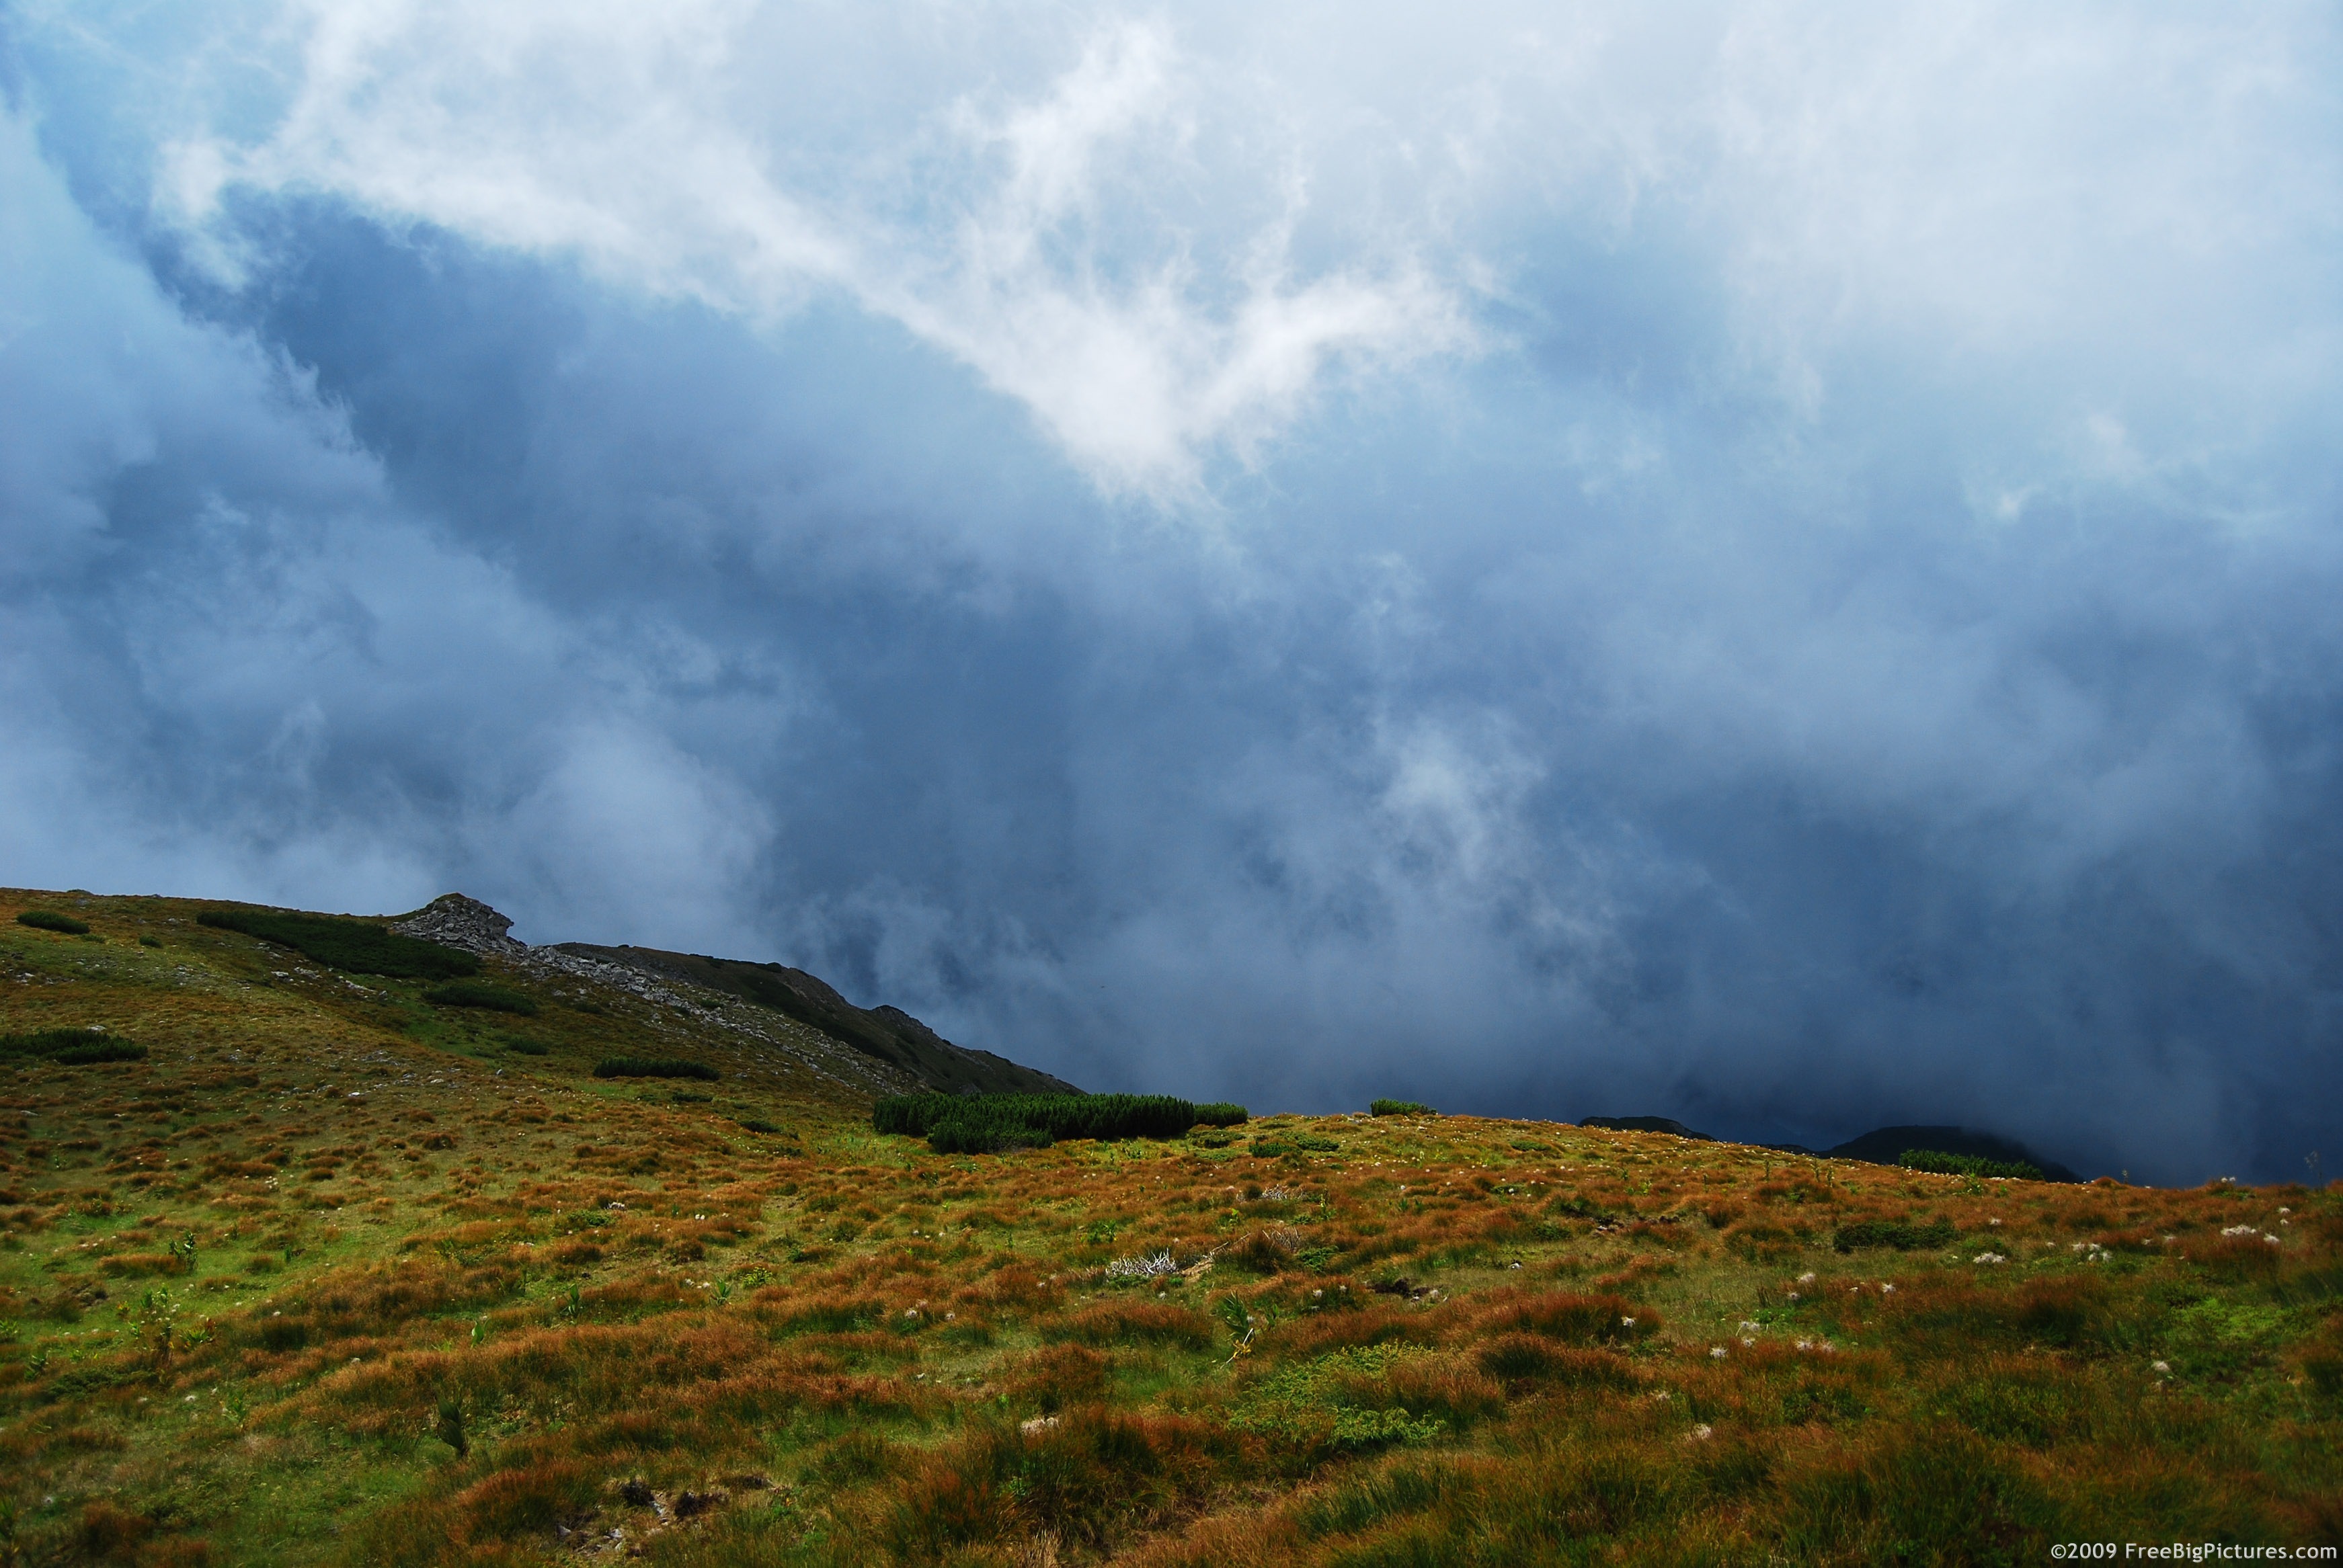 Stormy clouds on the sky over a mountain ridge covered with grass